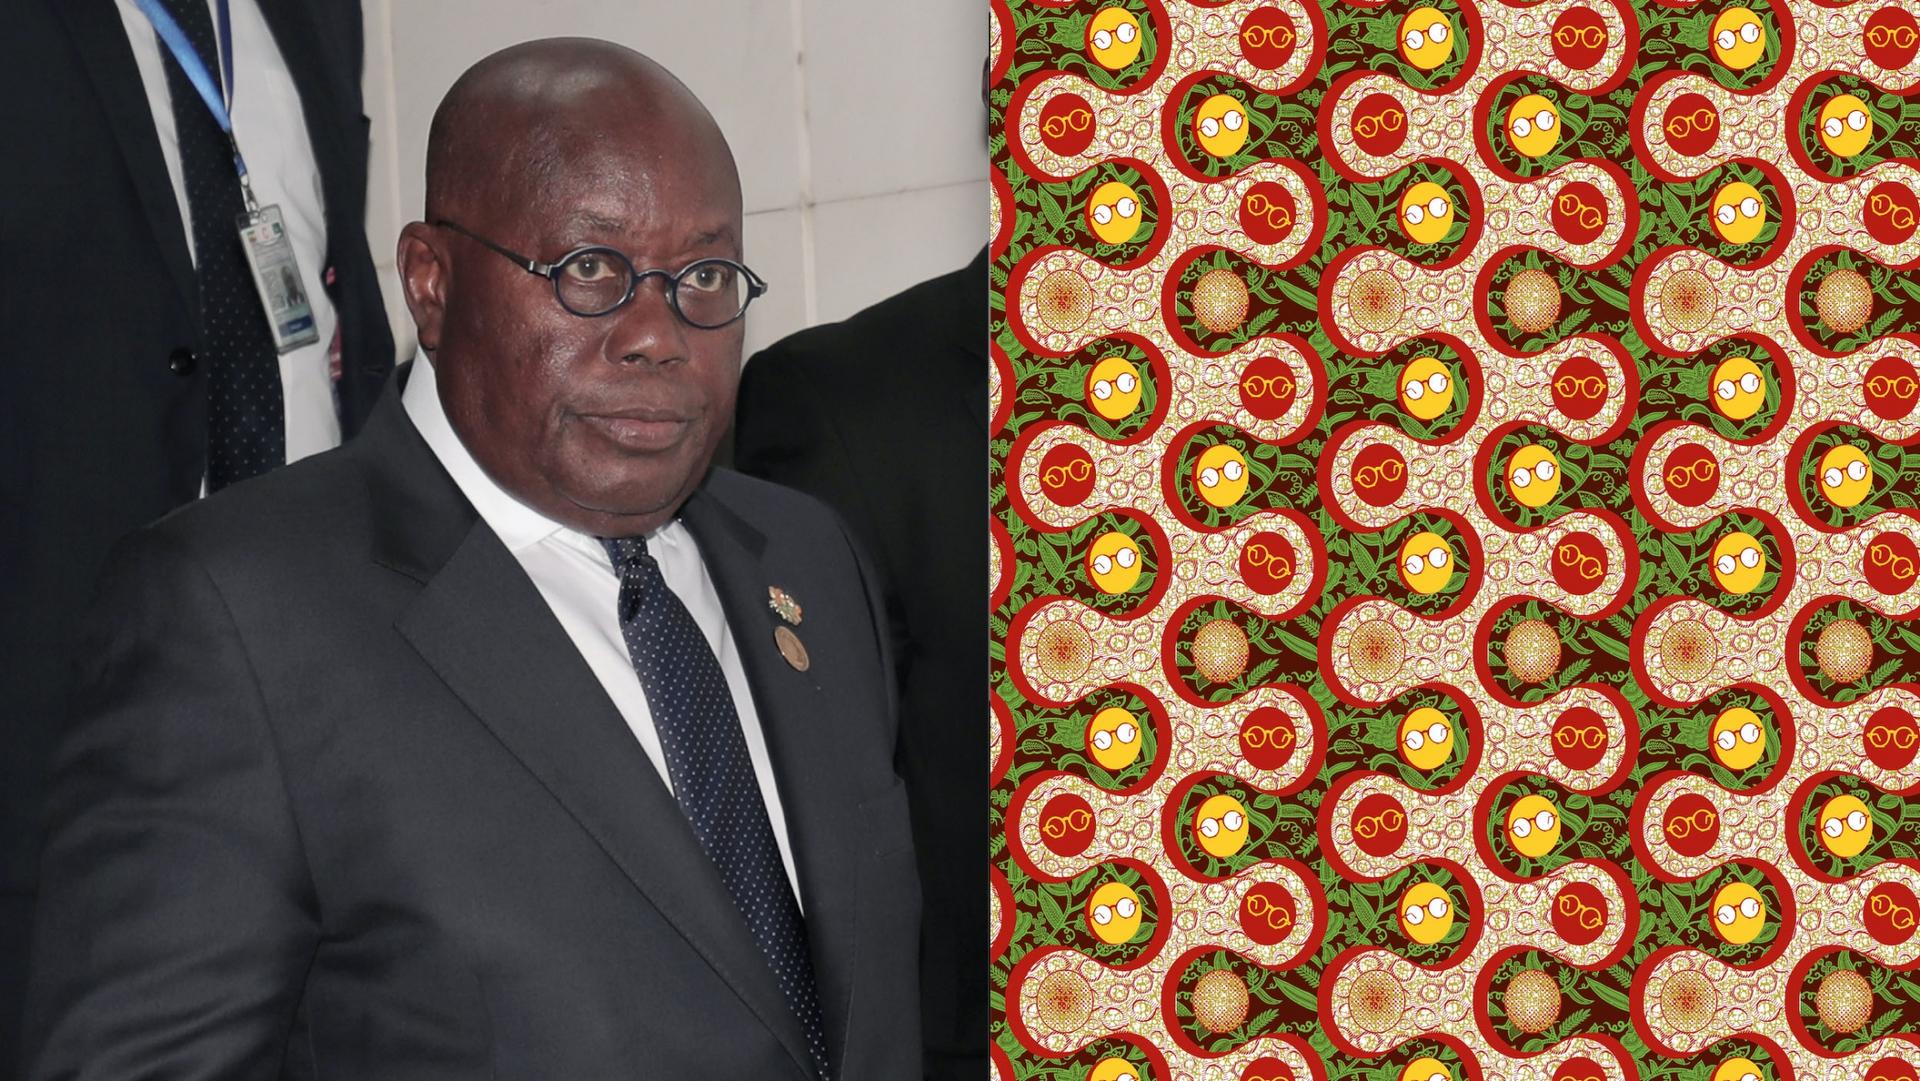 Another motif produced by Ghana Textiles Printing features eyeglasses, a nod to the frequent televised speeches of Ghana's President Nana Akufo-Addo, left, during the pandemic.